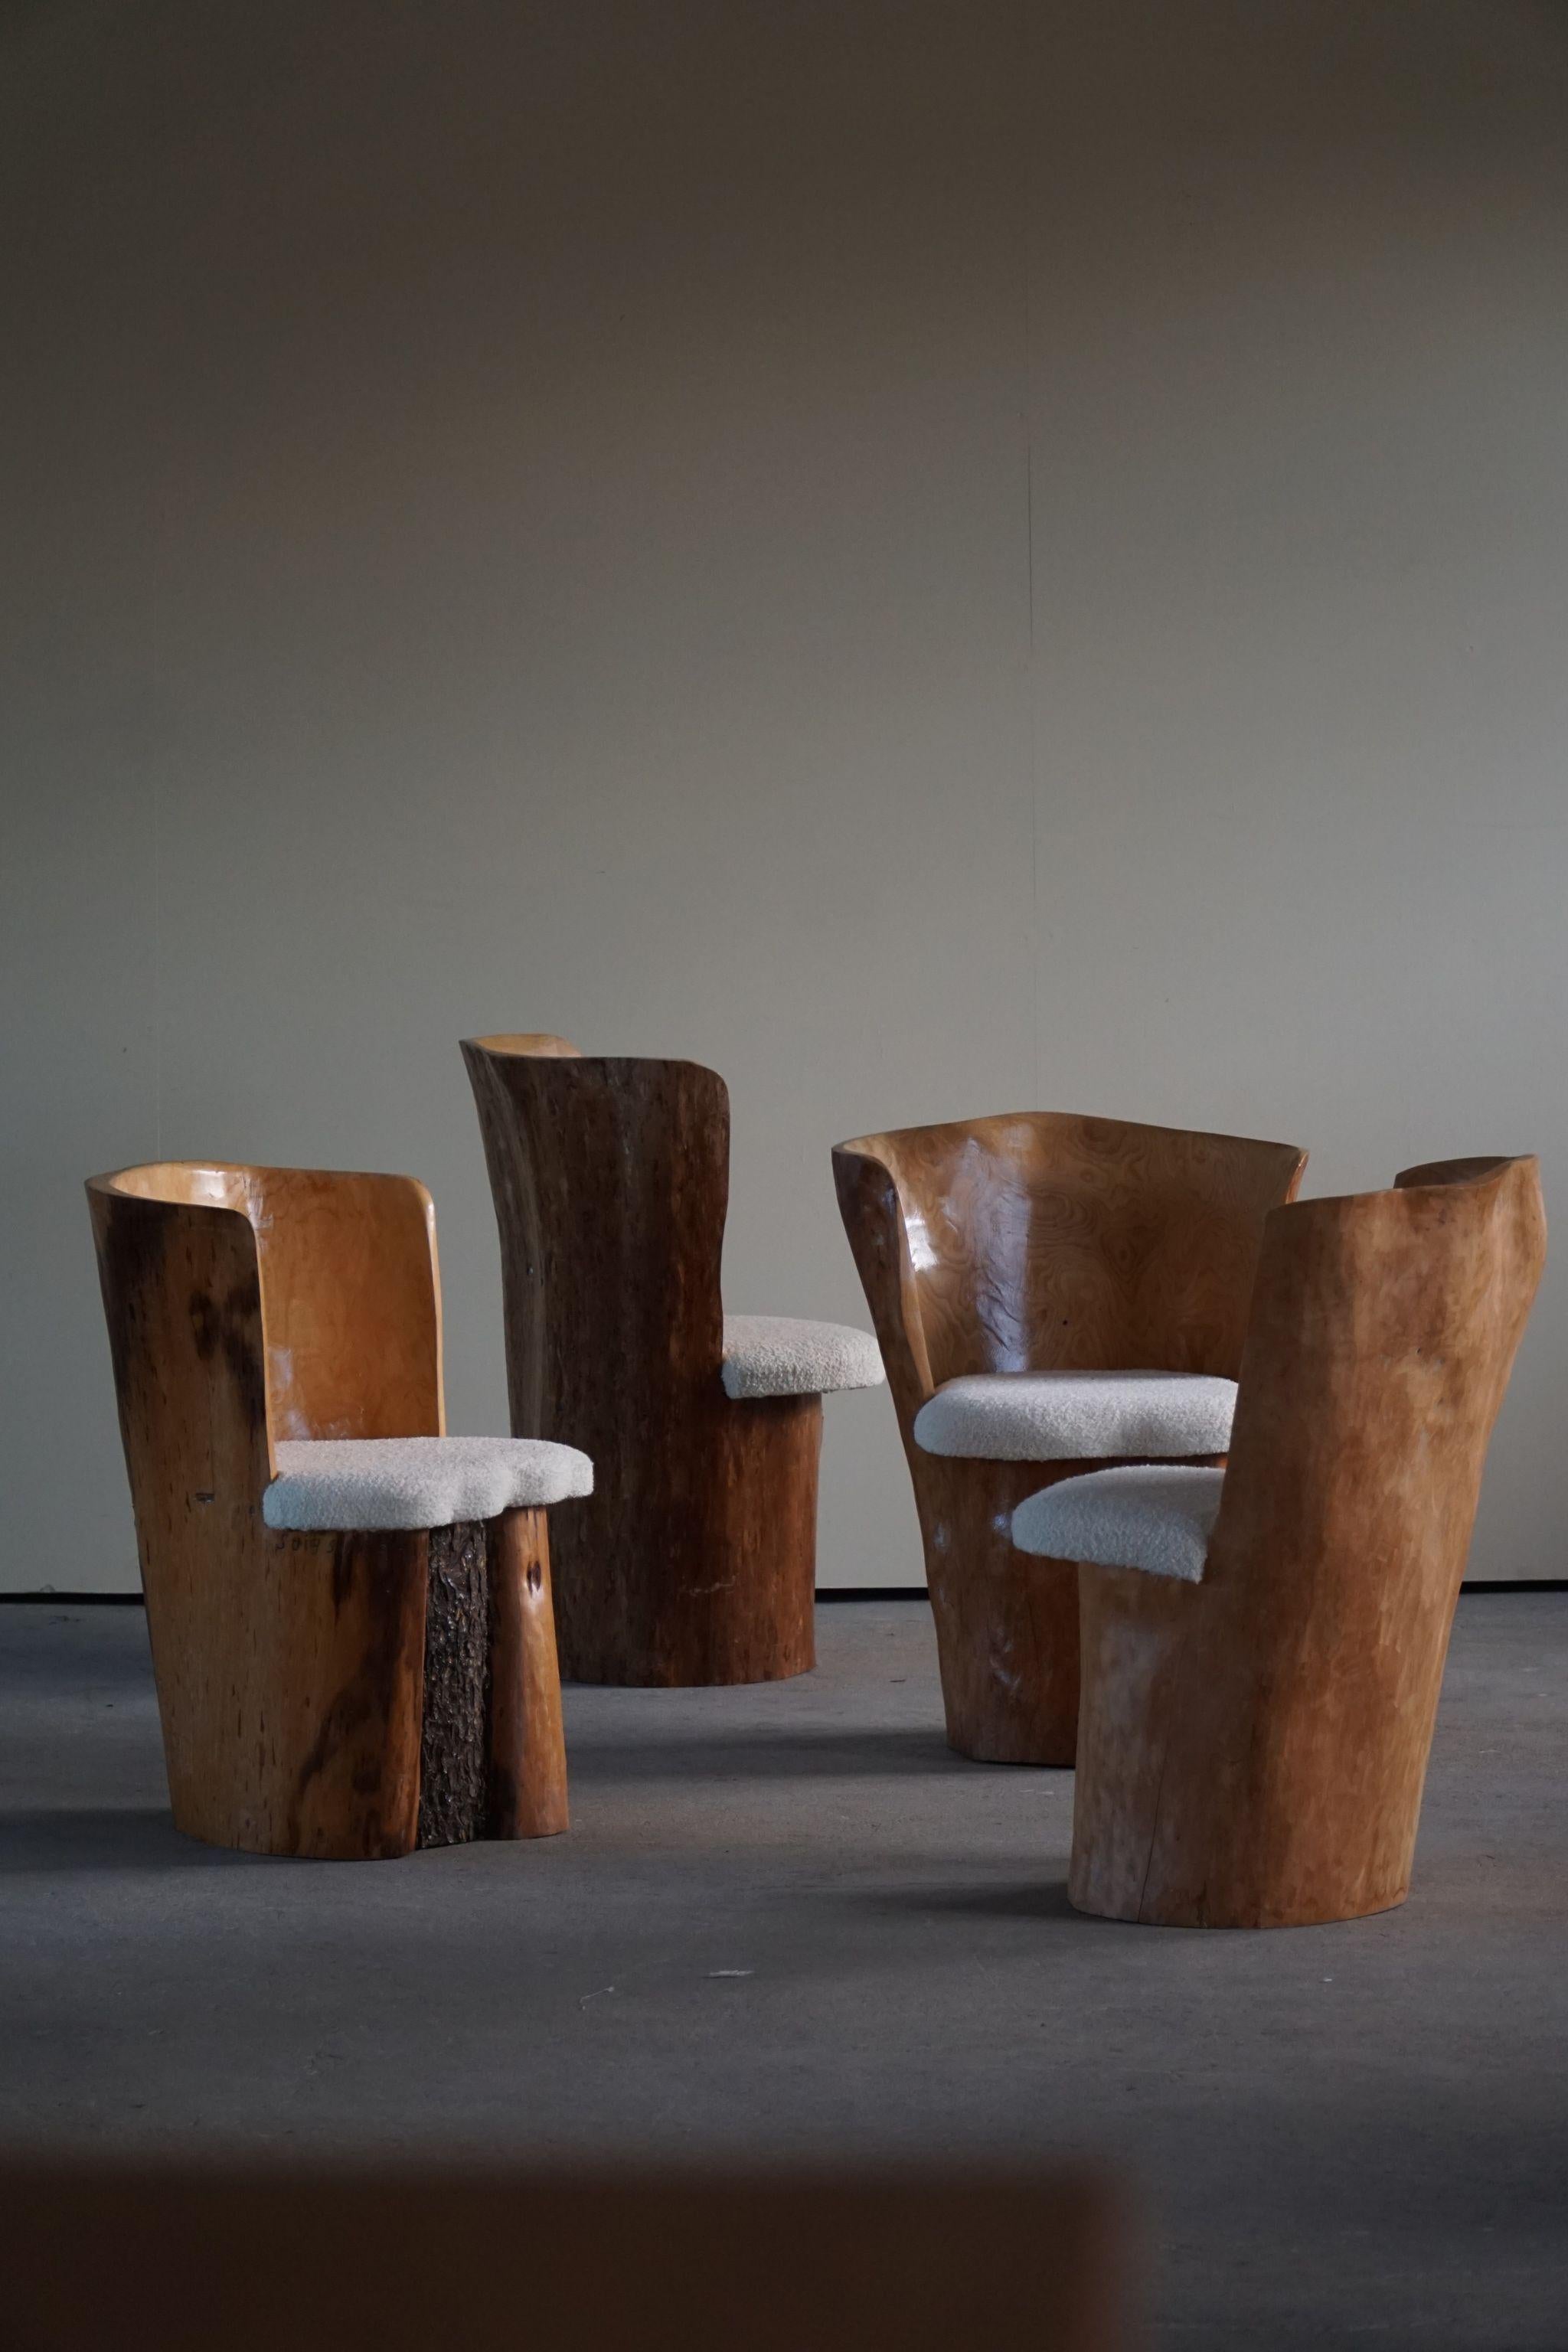 A truly unique dining set of 4 stump chairs, made in solid pine and reupholstered in bouclé wool. Hand carved in Sweden by a local cabinetmaker Stig Sundahl. Dated 1983-1987.

Such a decorative set for the modern interior and a great opportunity